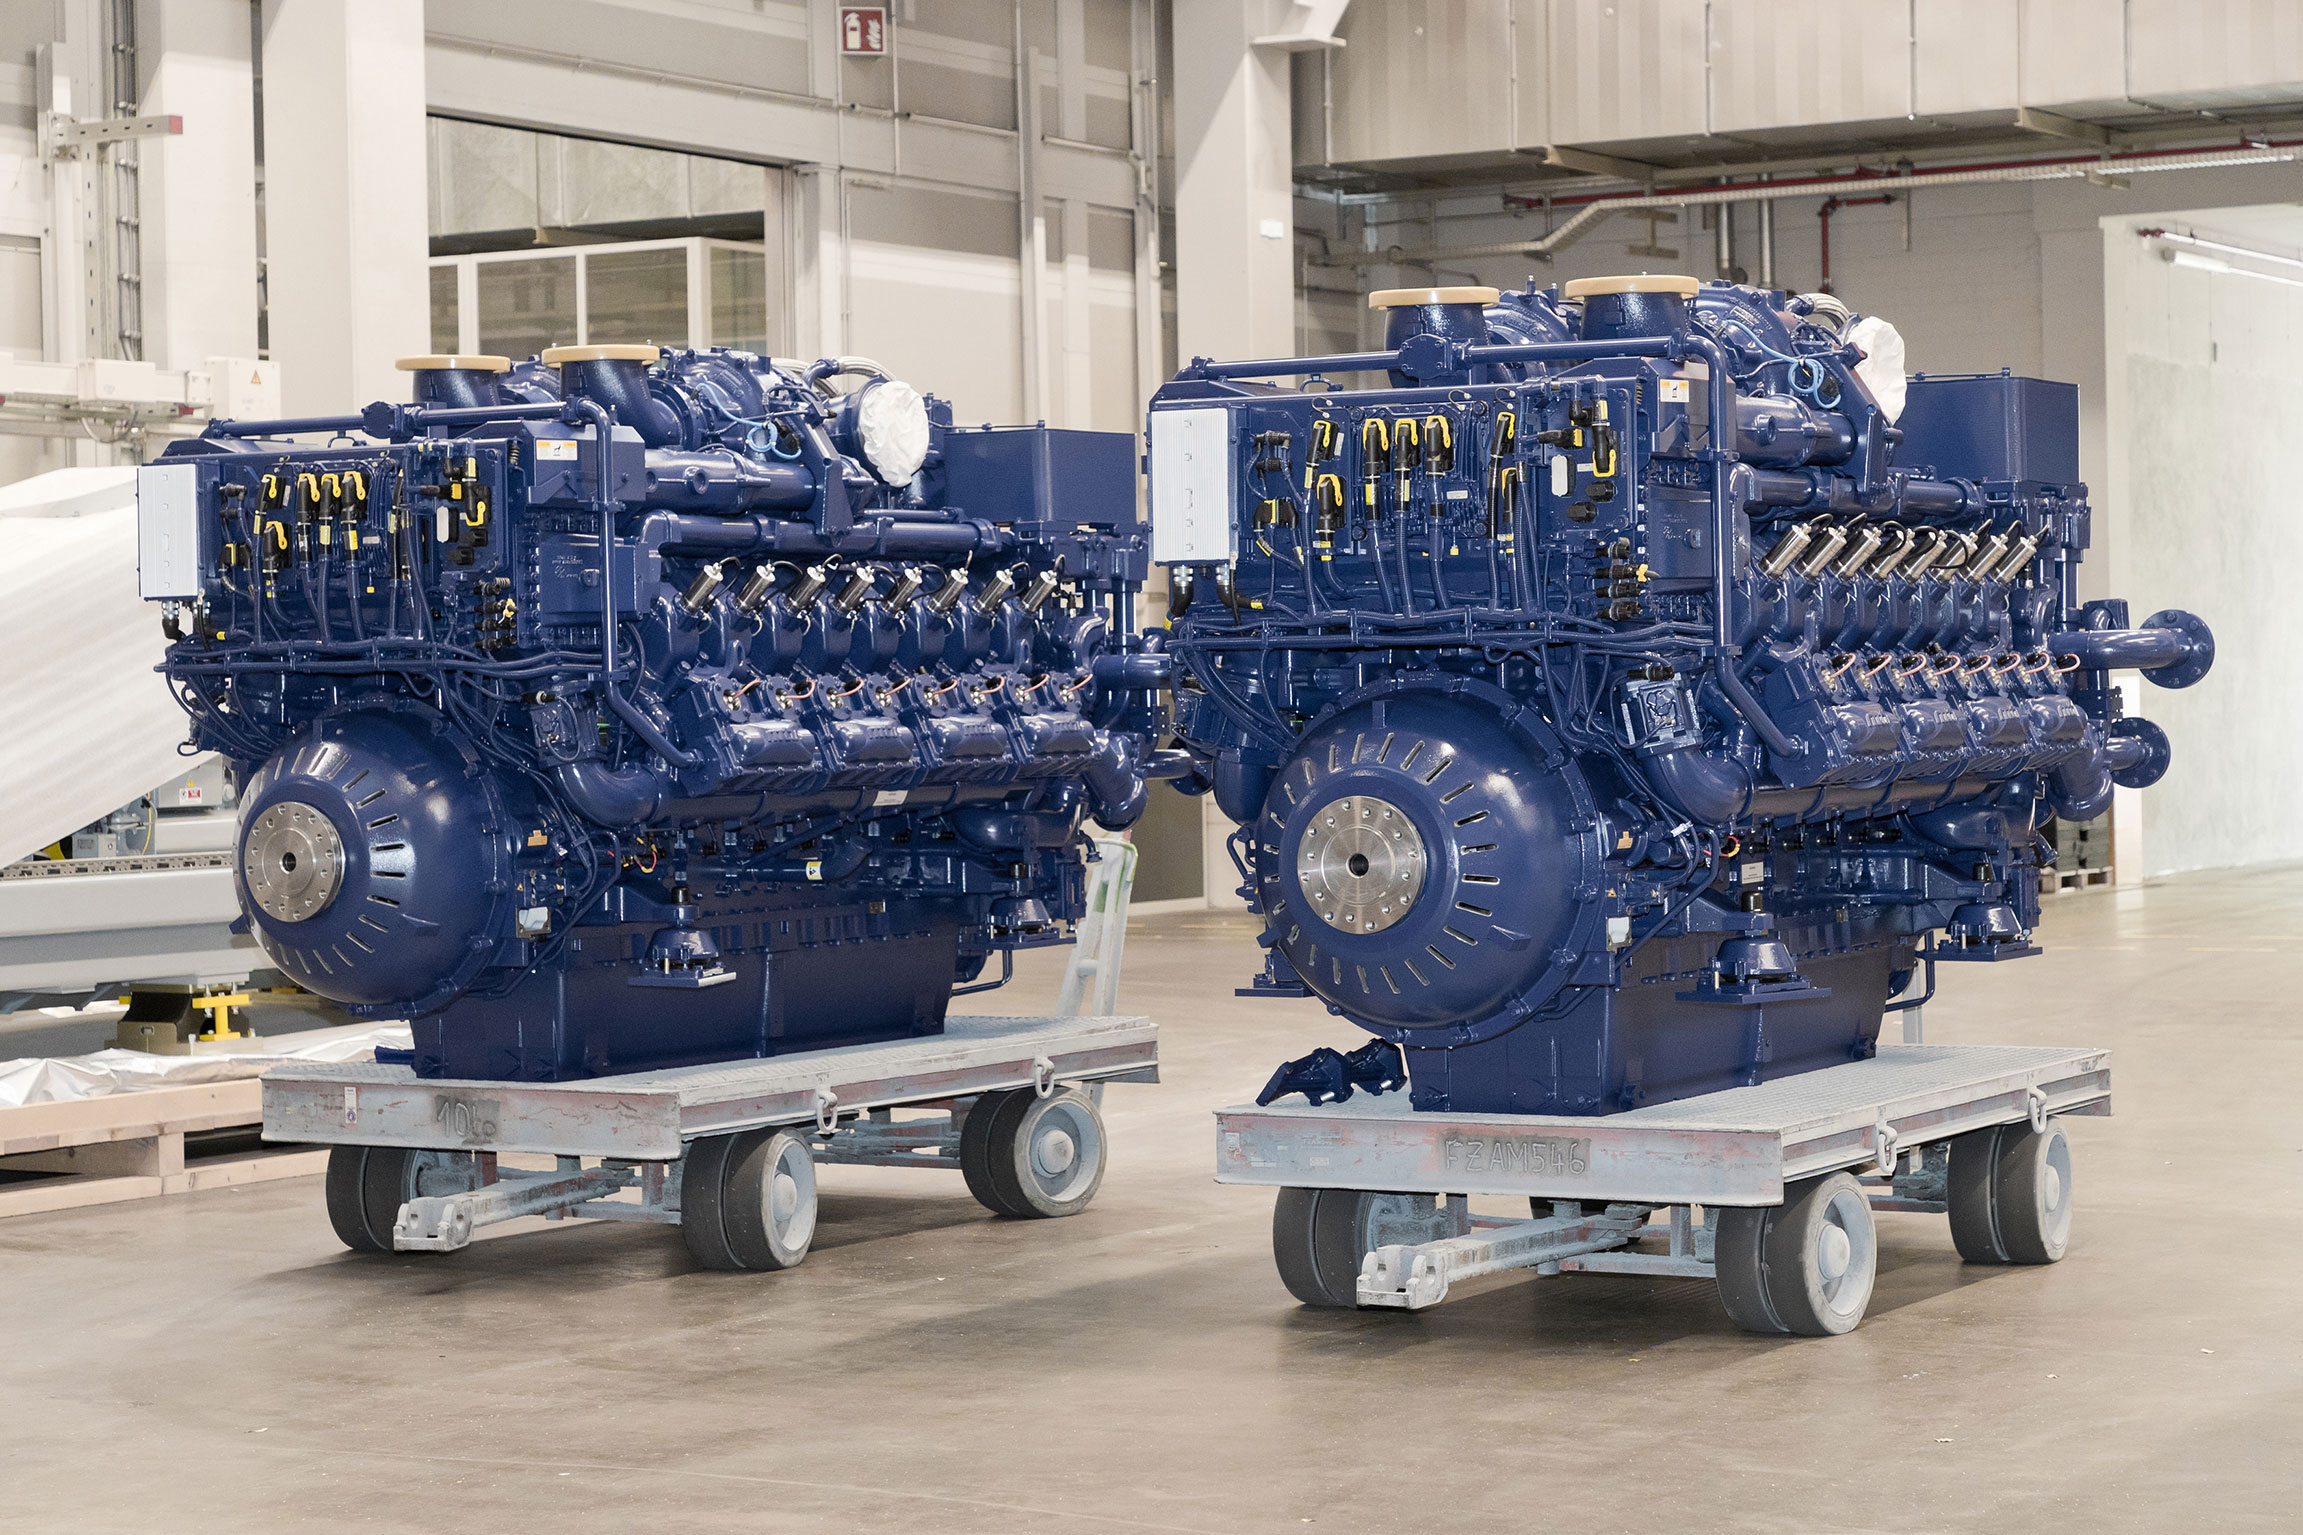 Rolls-Royce engines picked for world's first LNG-hybrid tug